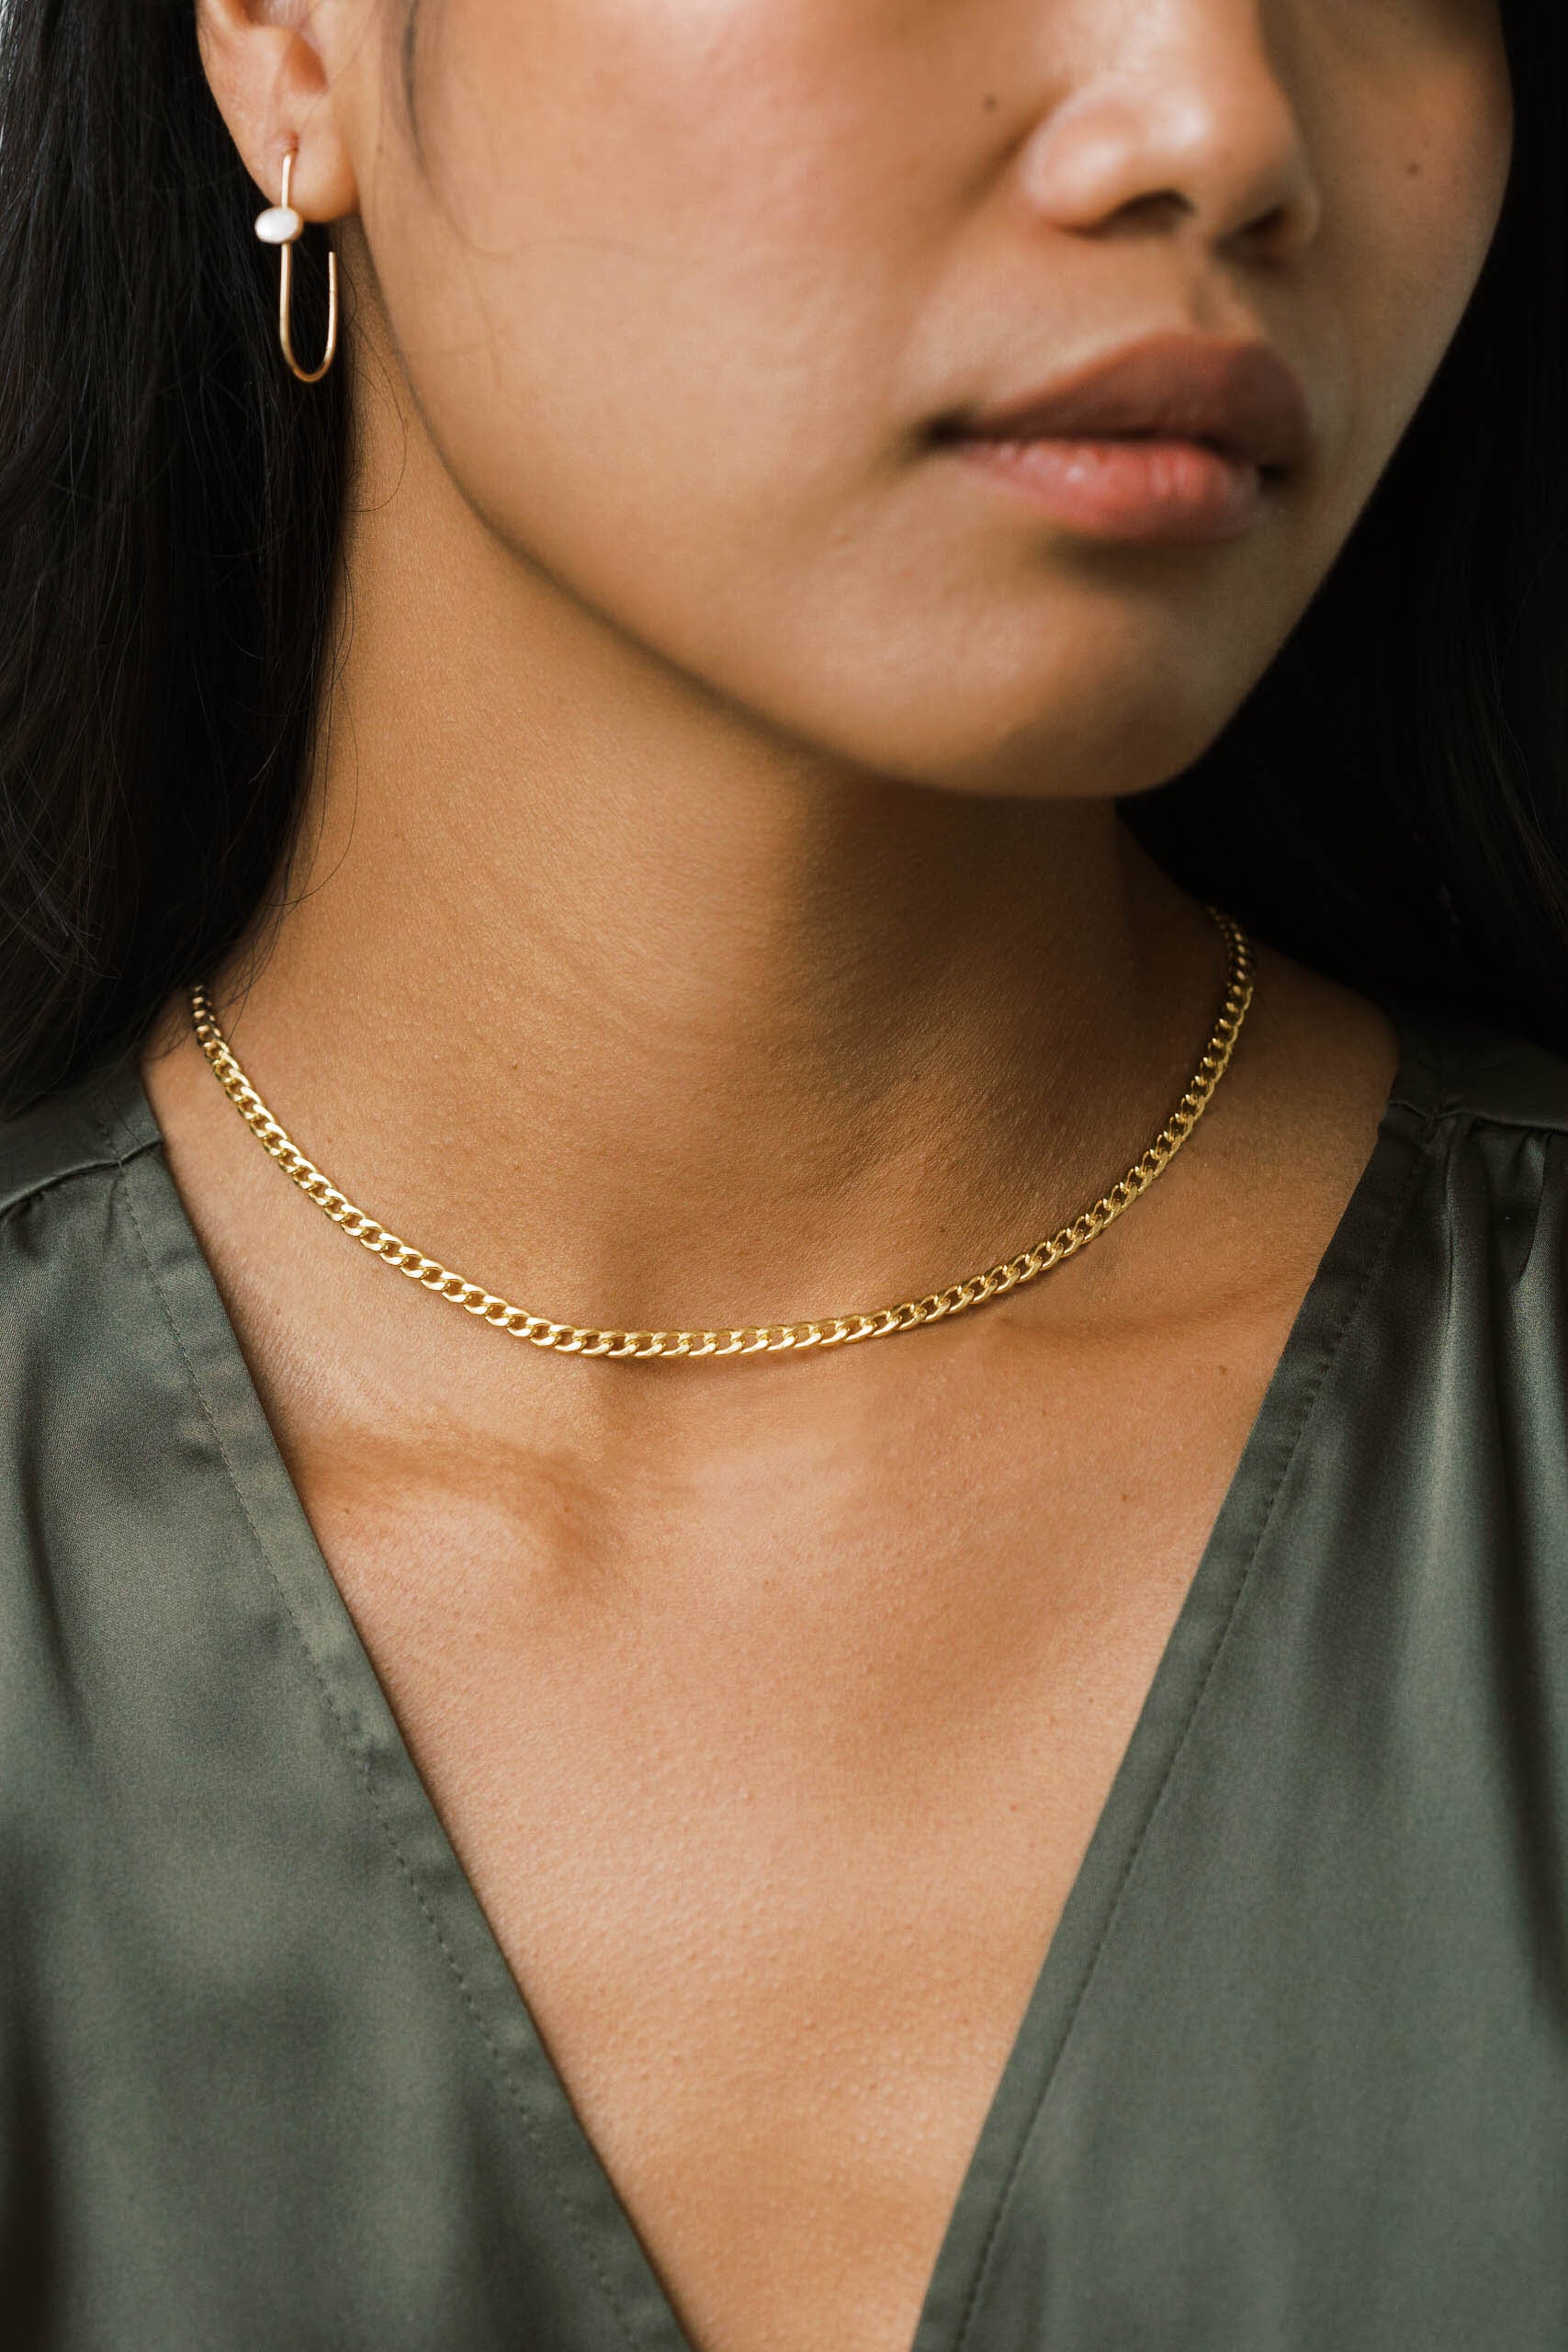 Elegant recycled gold curb chain for everyday wear